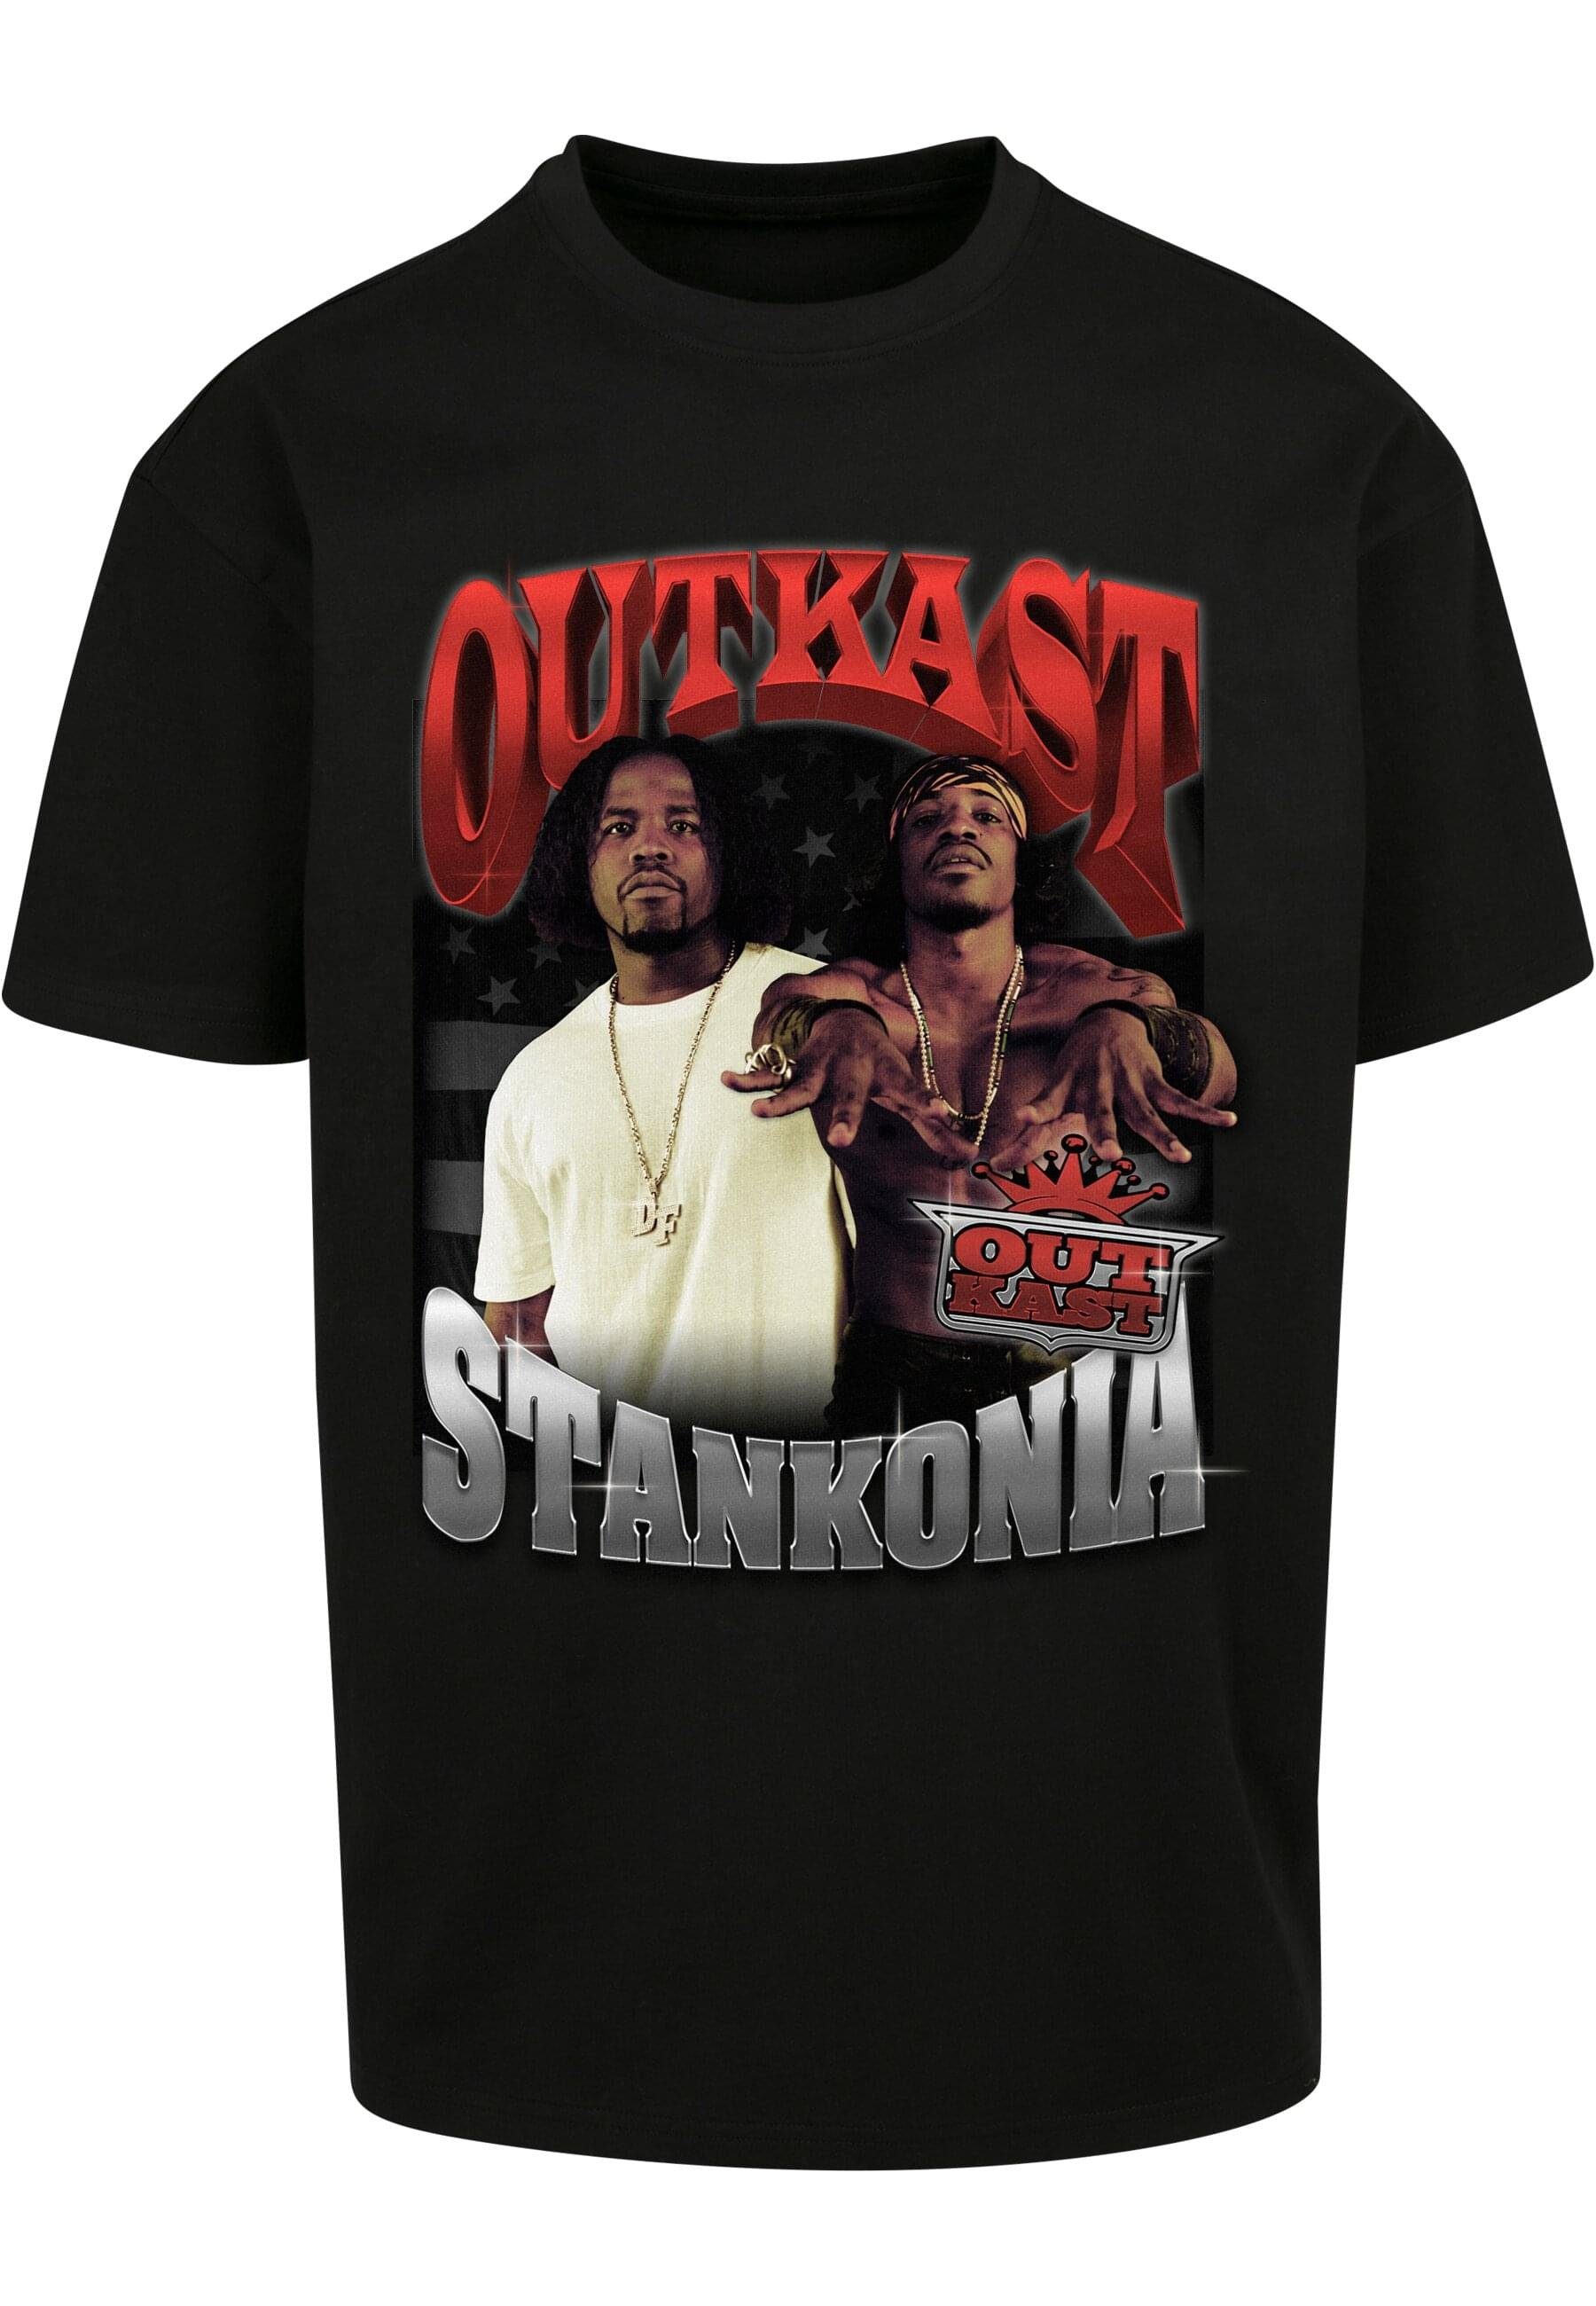 Mister Stankonia black T-Shirt Oversize (1-tlg) Upscale Herren Outkast Tee Tee by